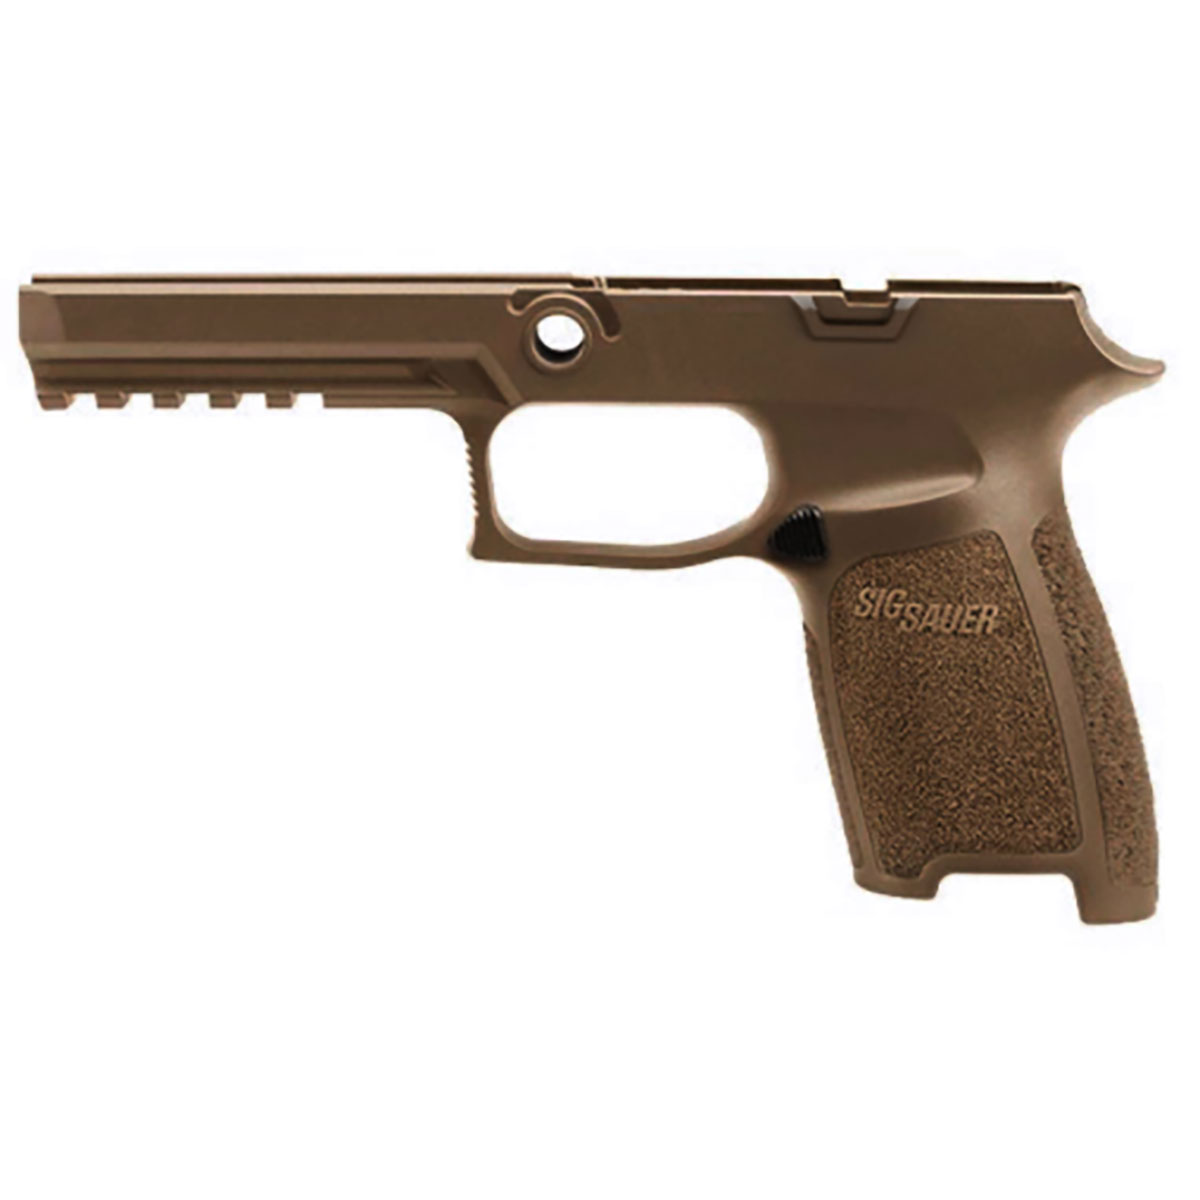 SIG SAUER, INC. - SIG P320 GRIP MODULE FULL SIZE COYOTE